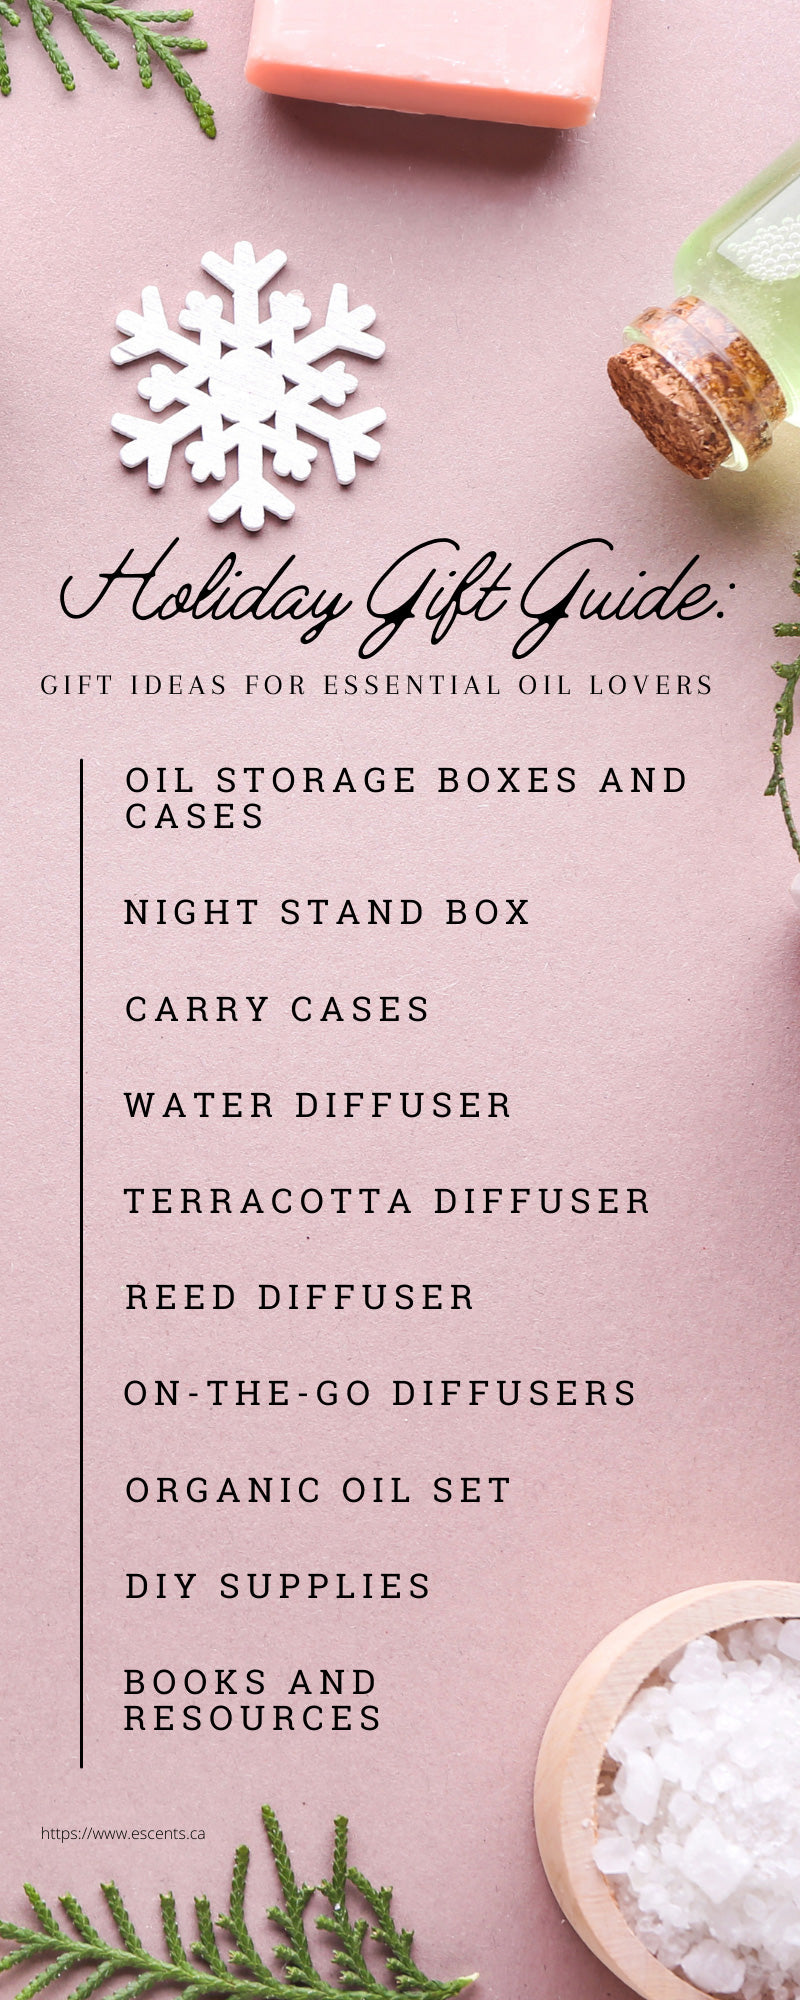 Holiday Gift Guide: Gift Ideas for Essential Oil Lovers